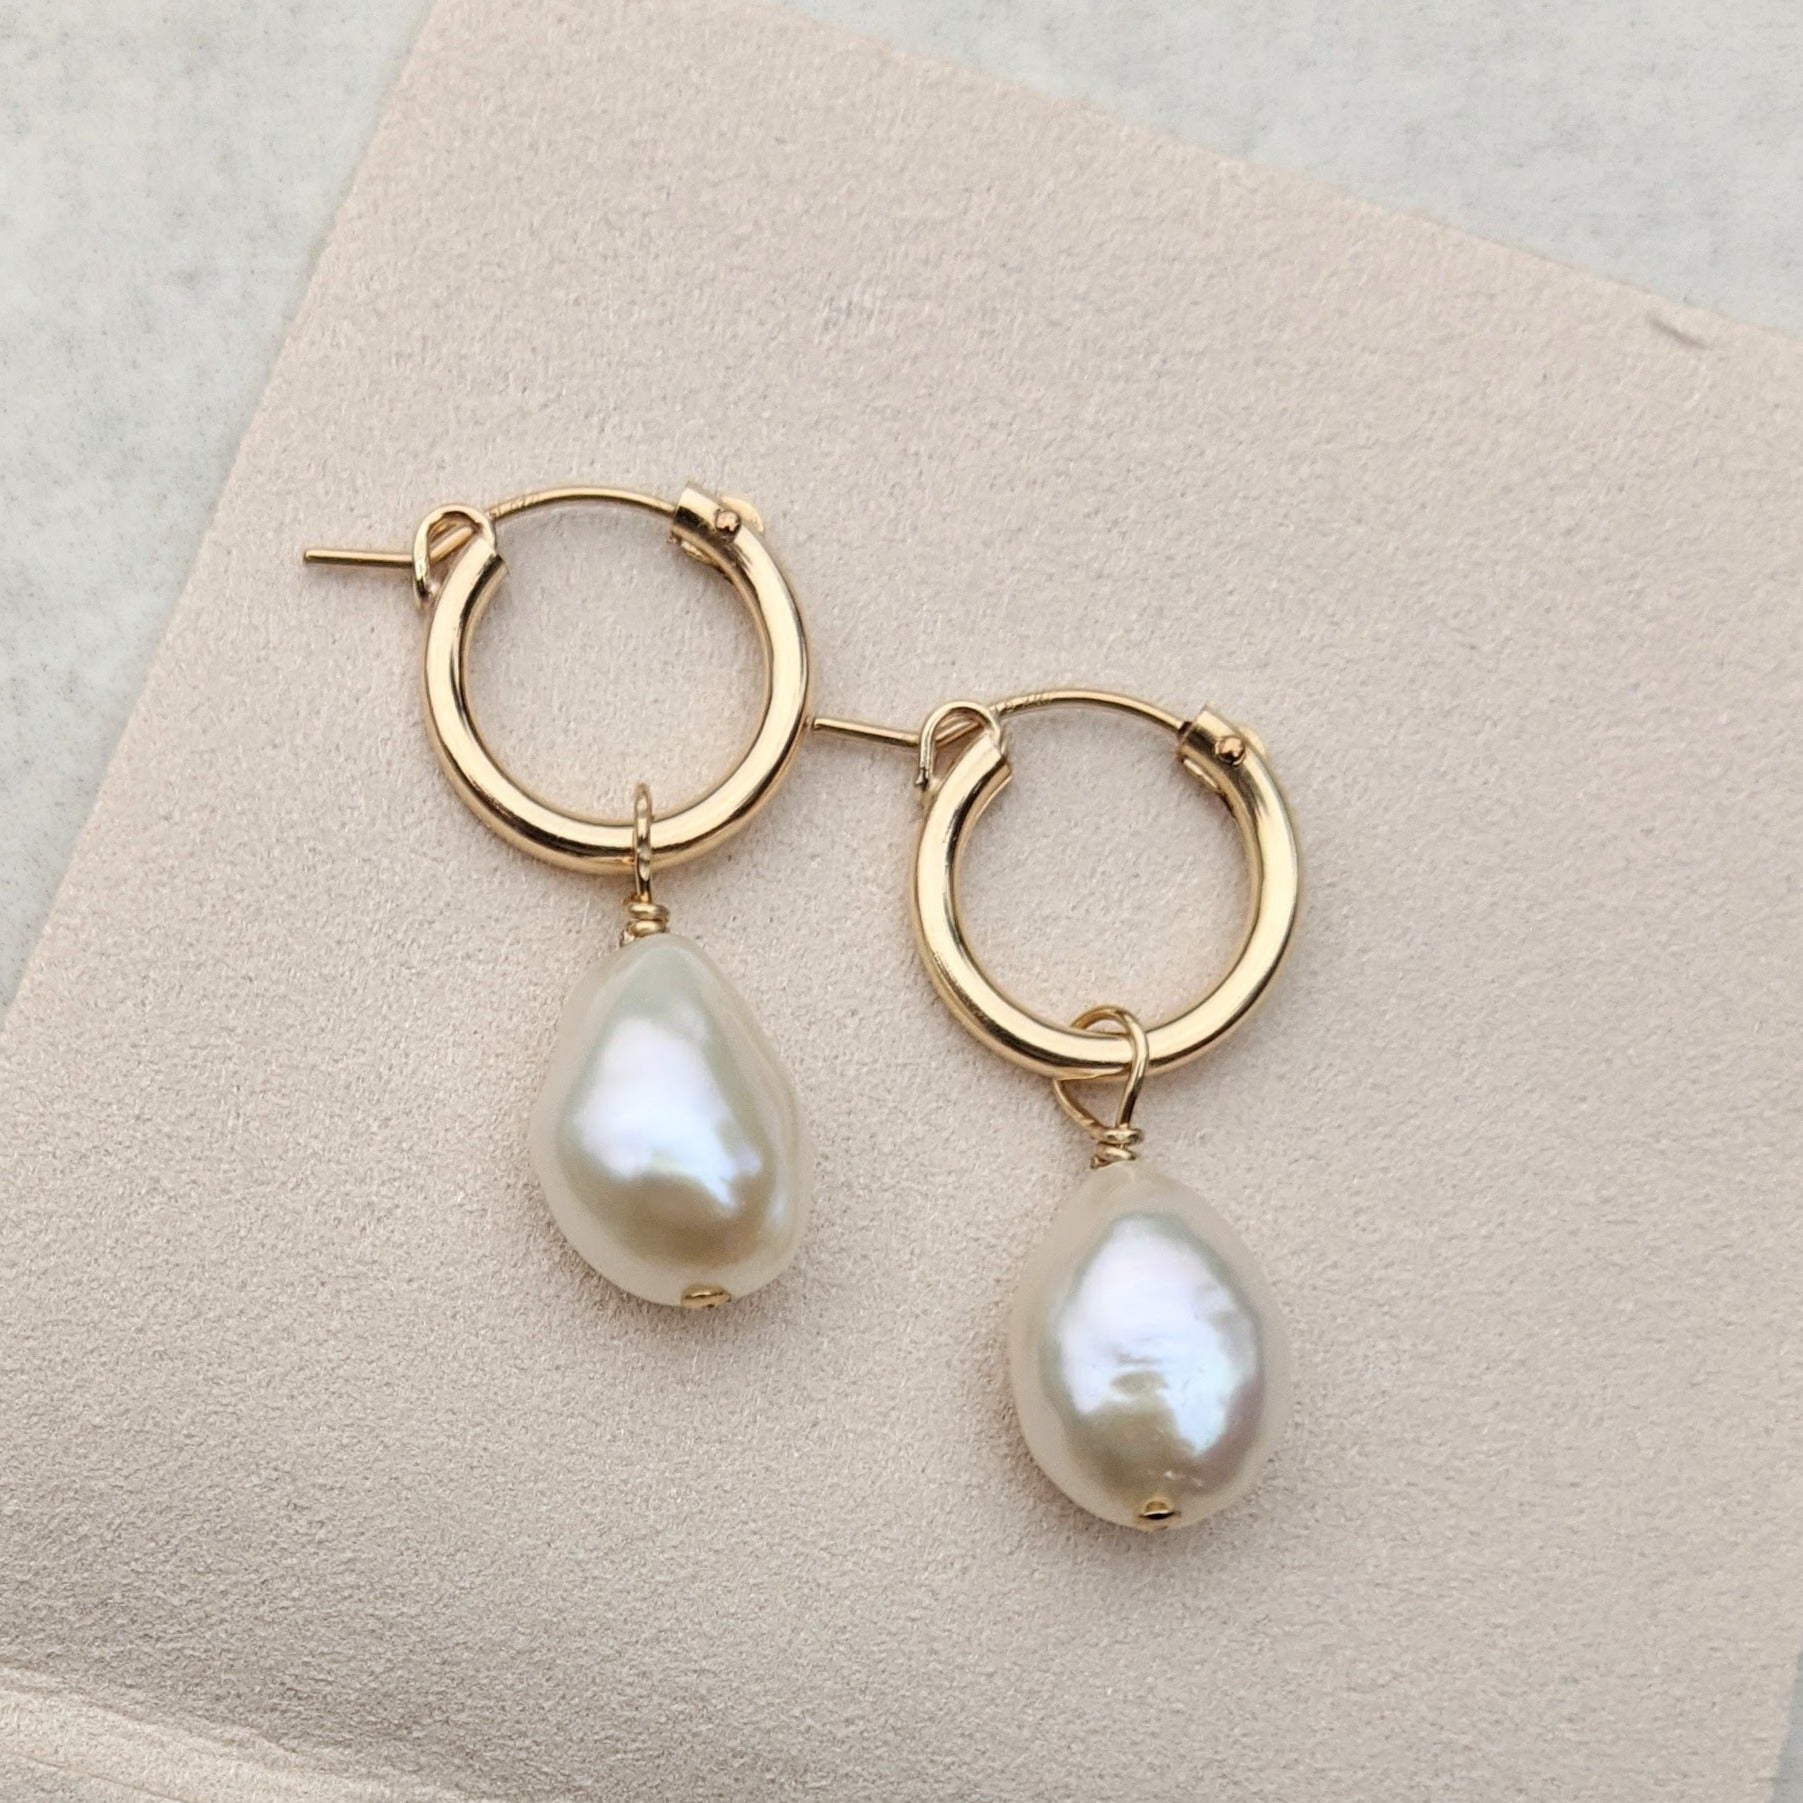 Gold filled hoop earring with baroque pearl pendant